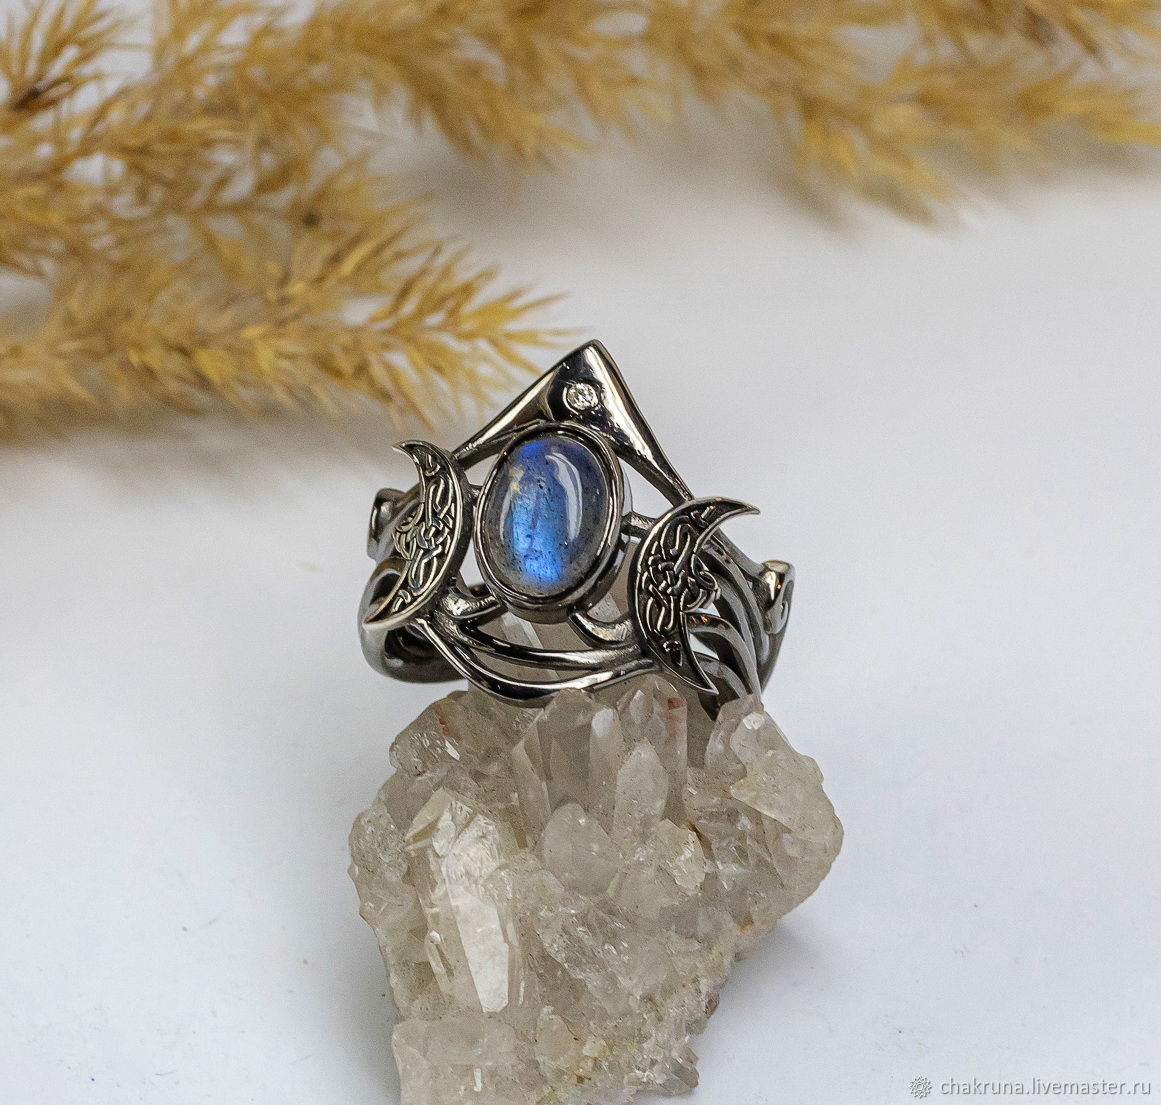 15.75, 17 and 18 r-r Silver ring with labradorite 'Tiara', Rings, Moscow,  Фото №1